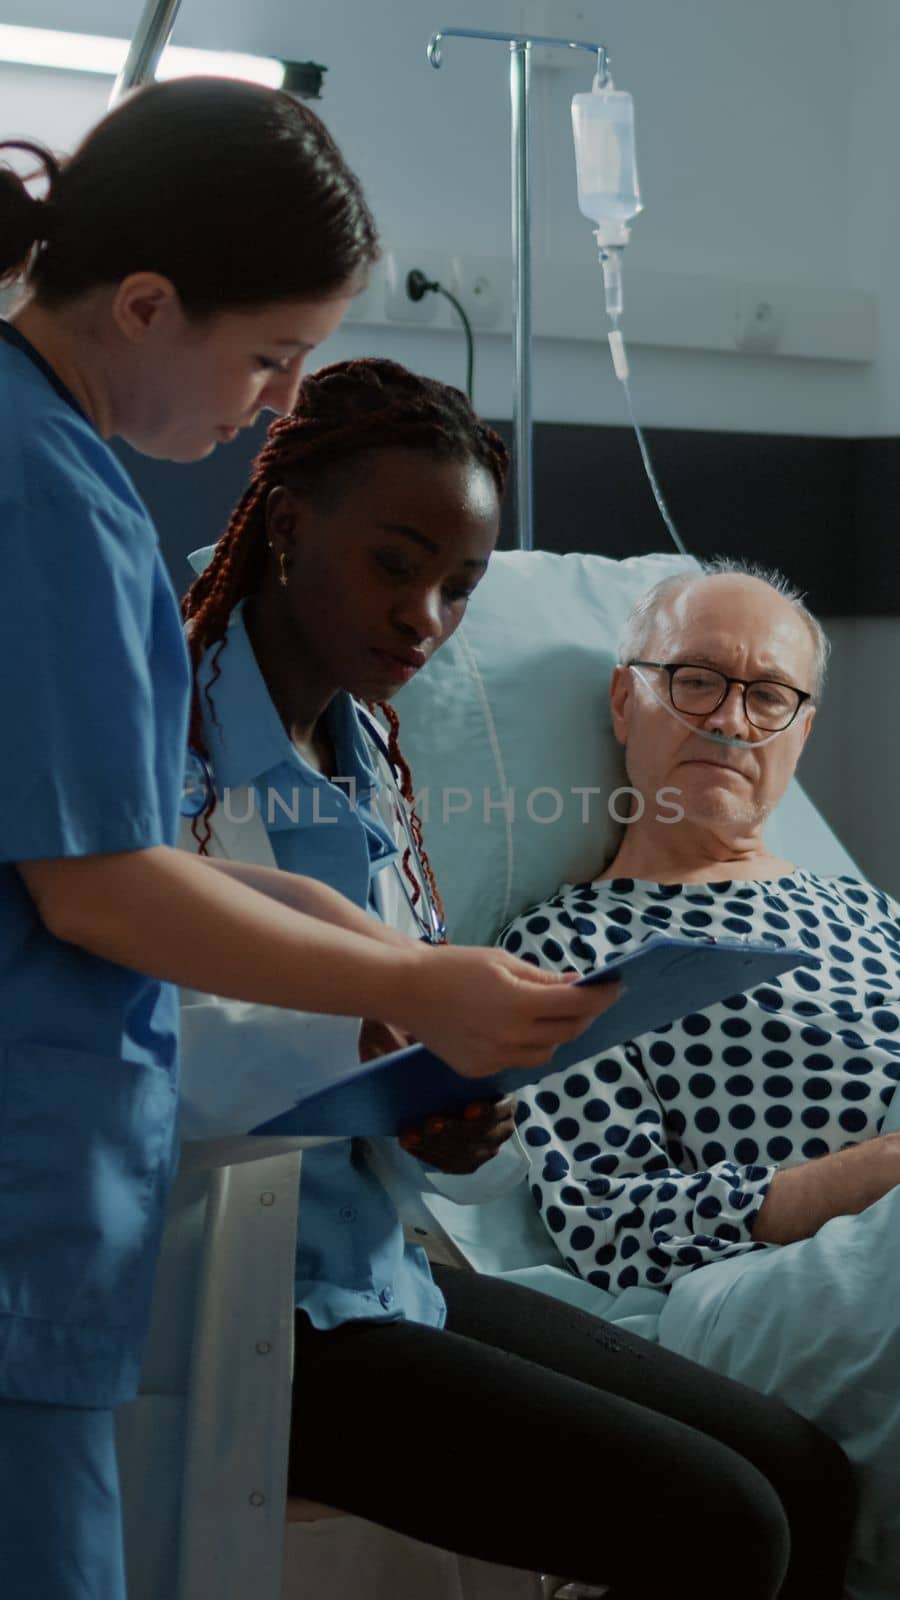 African american doctor talking to sick patient in bed at hospital ward for treating health problems and injury. Old man asking medic and nurse about intensive care and illness recovery